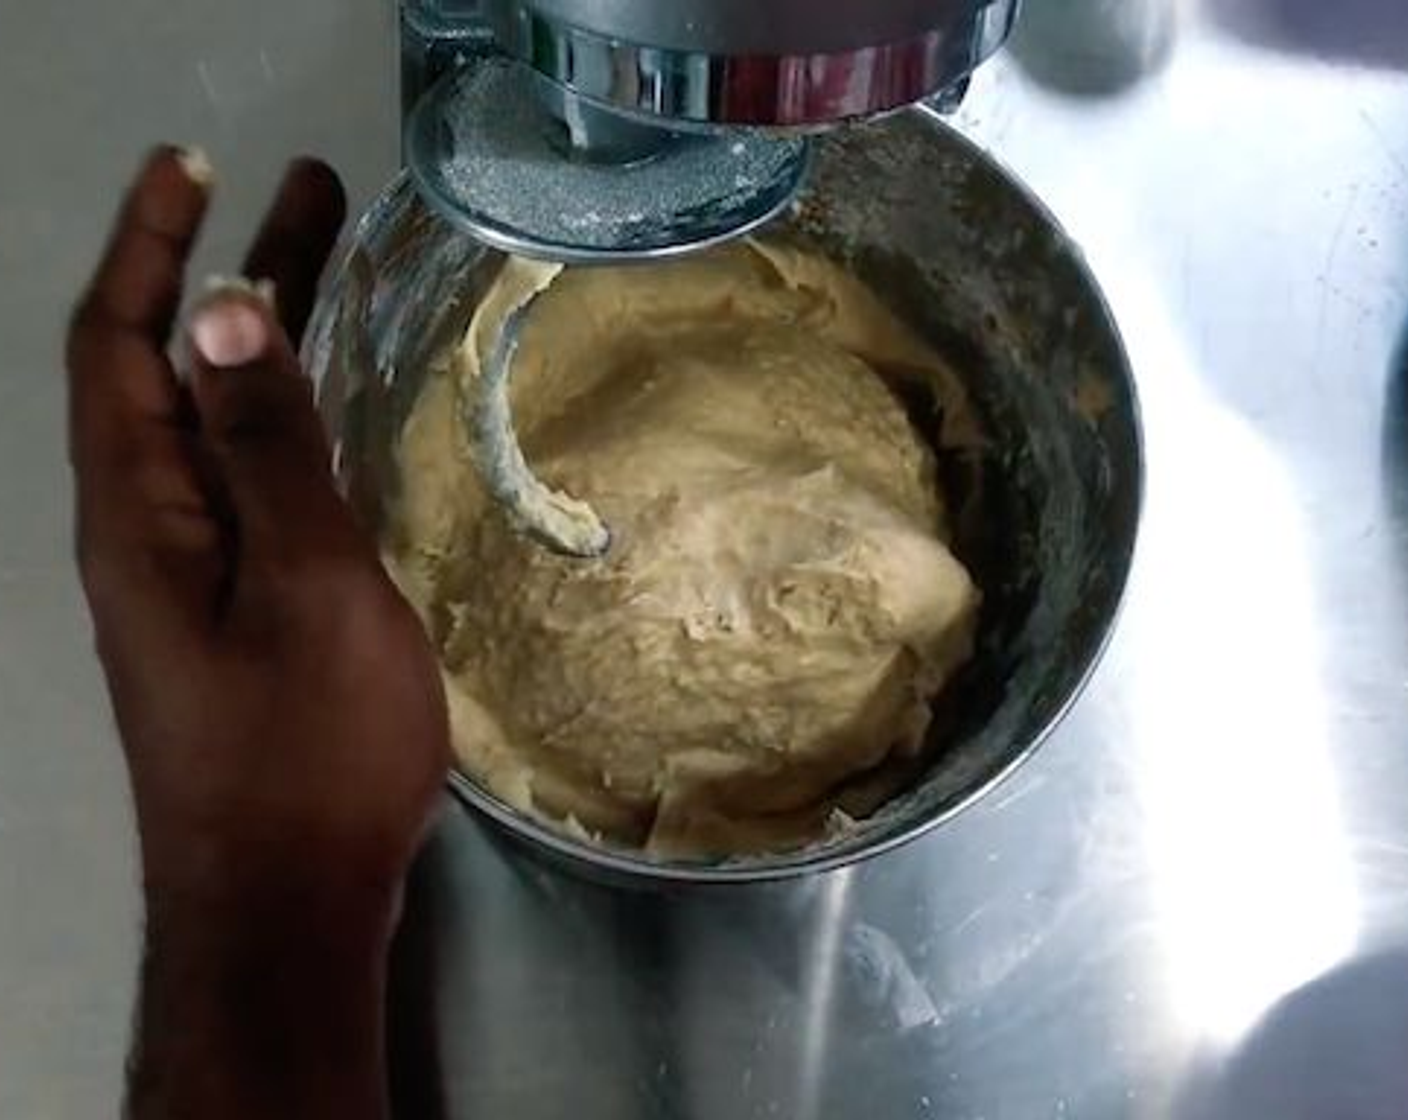 step 5 Add the remaining All-Purpose Flour (1/2 cup) and mix until it starts to pull together as a dough. Stop the mixing and scrape everything down then continue to knead for another 5 minutes.